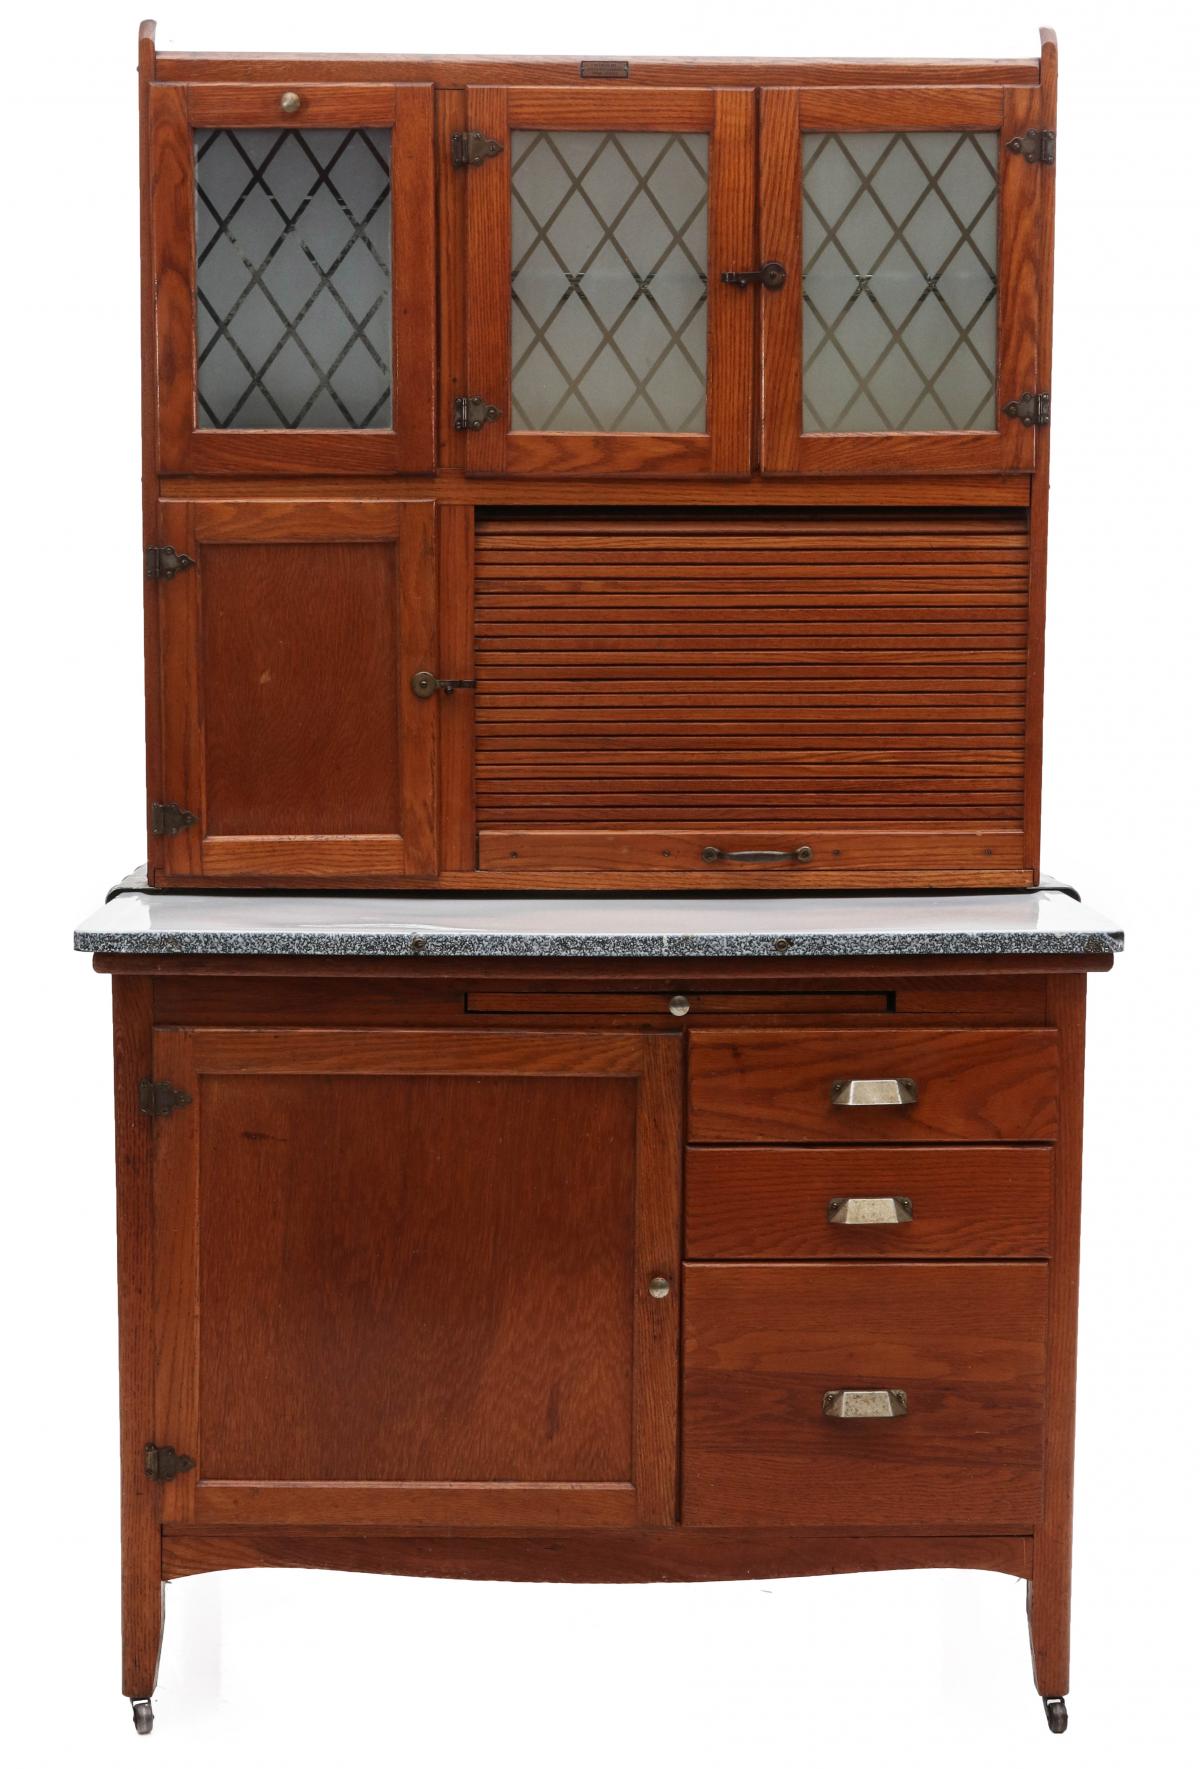 A CLASSIC 1930s KITCHEN CABINET WITH VARIOUS FEATURES